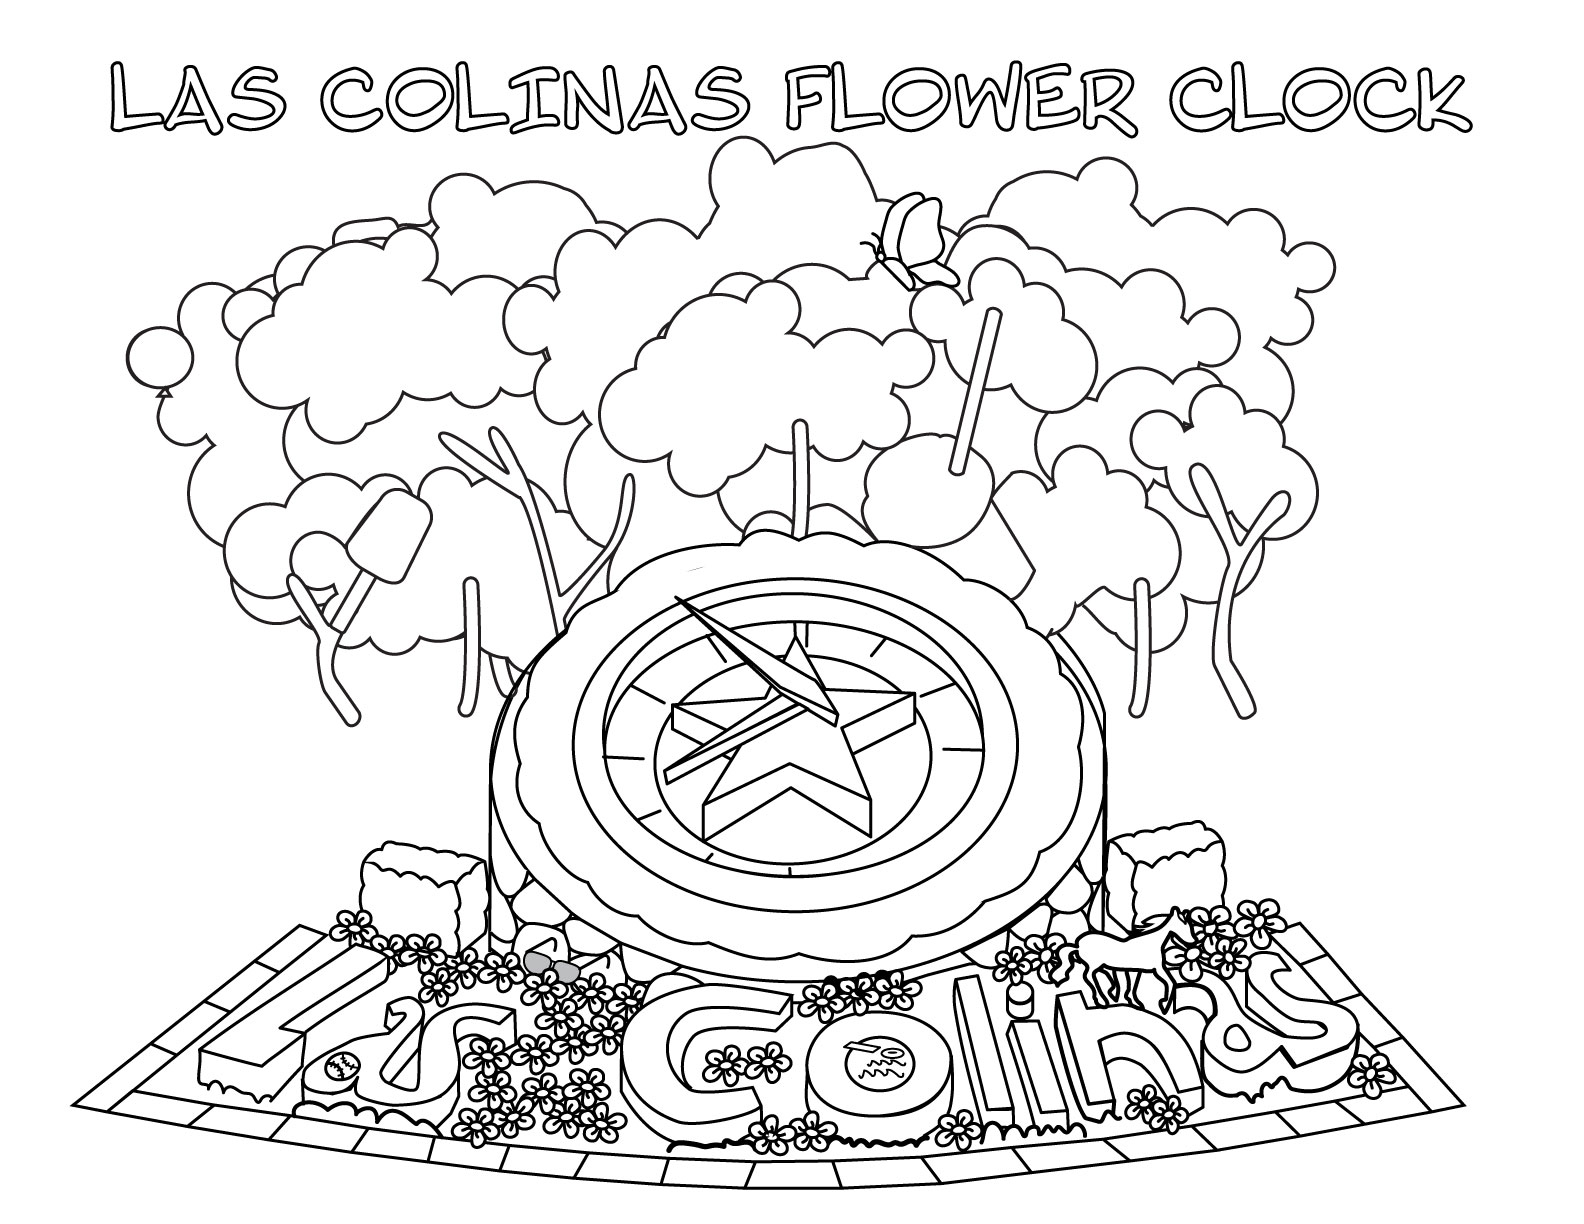 Flower Clock Activity Page